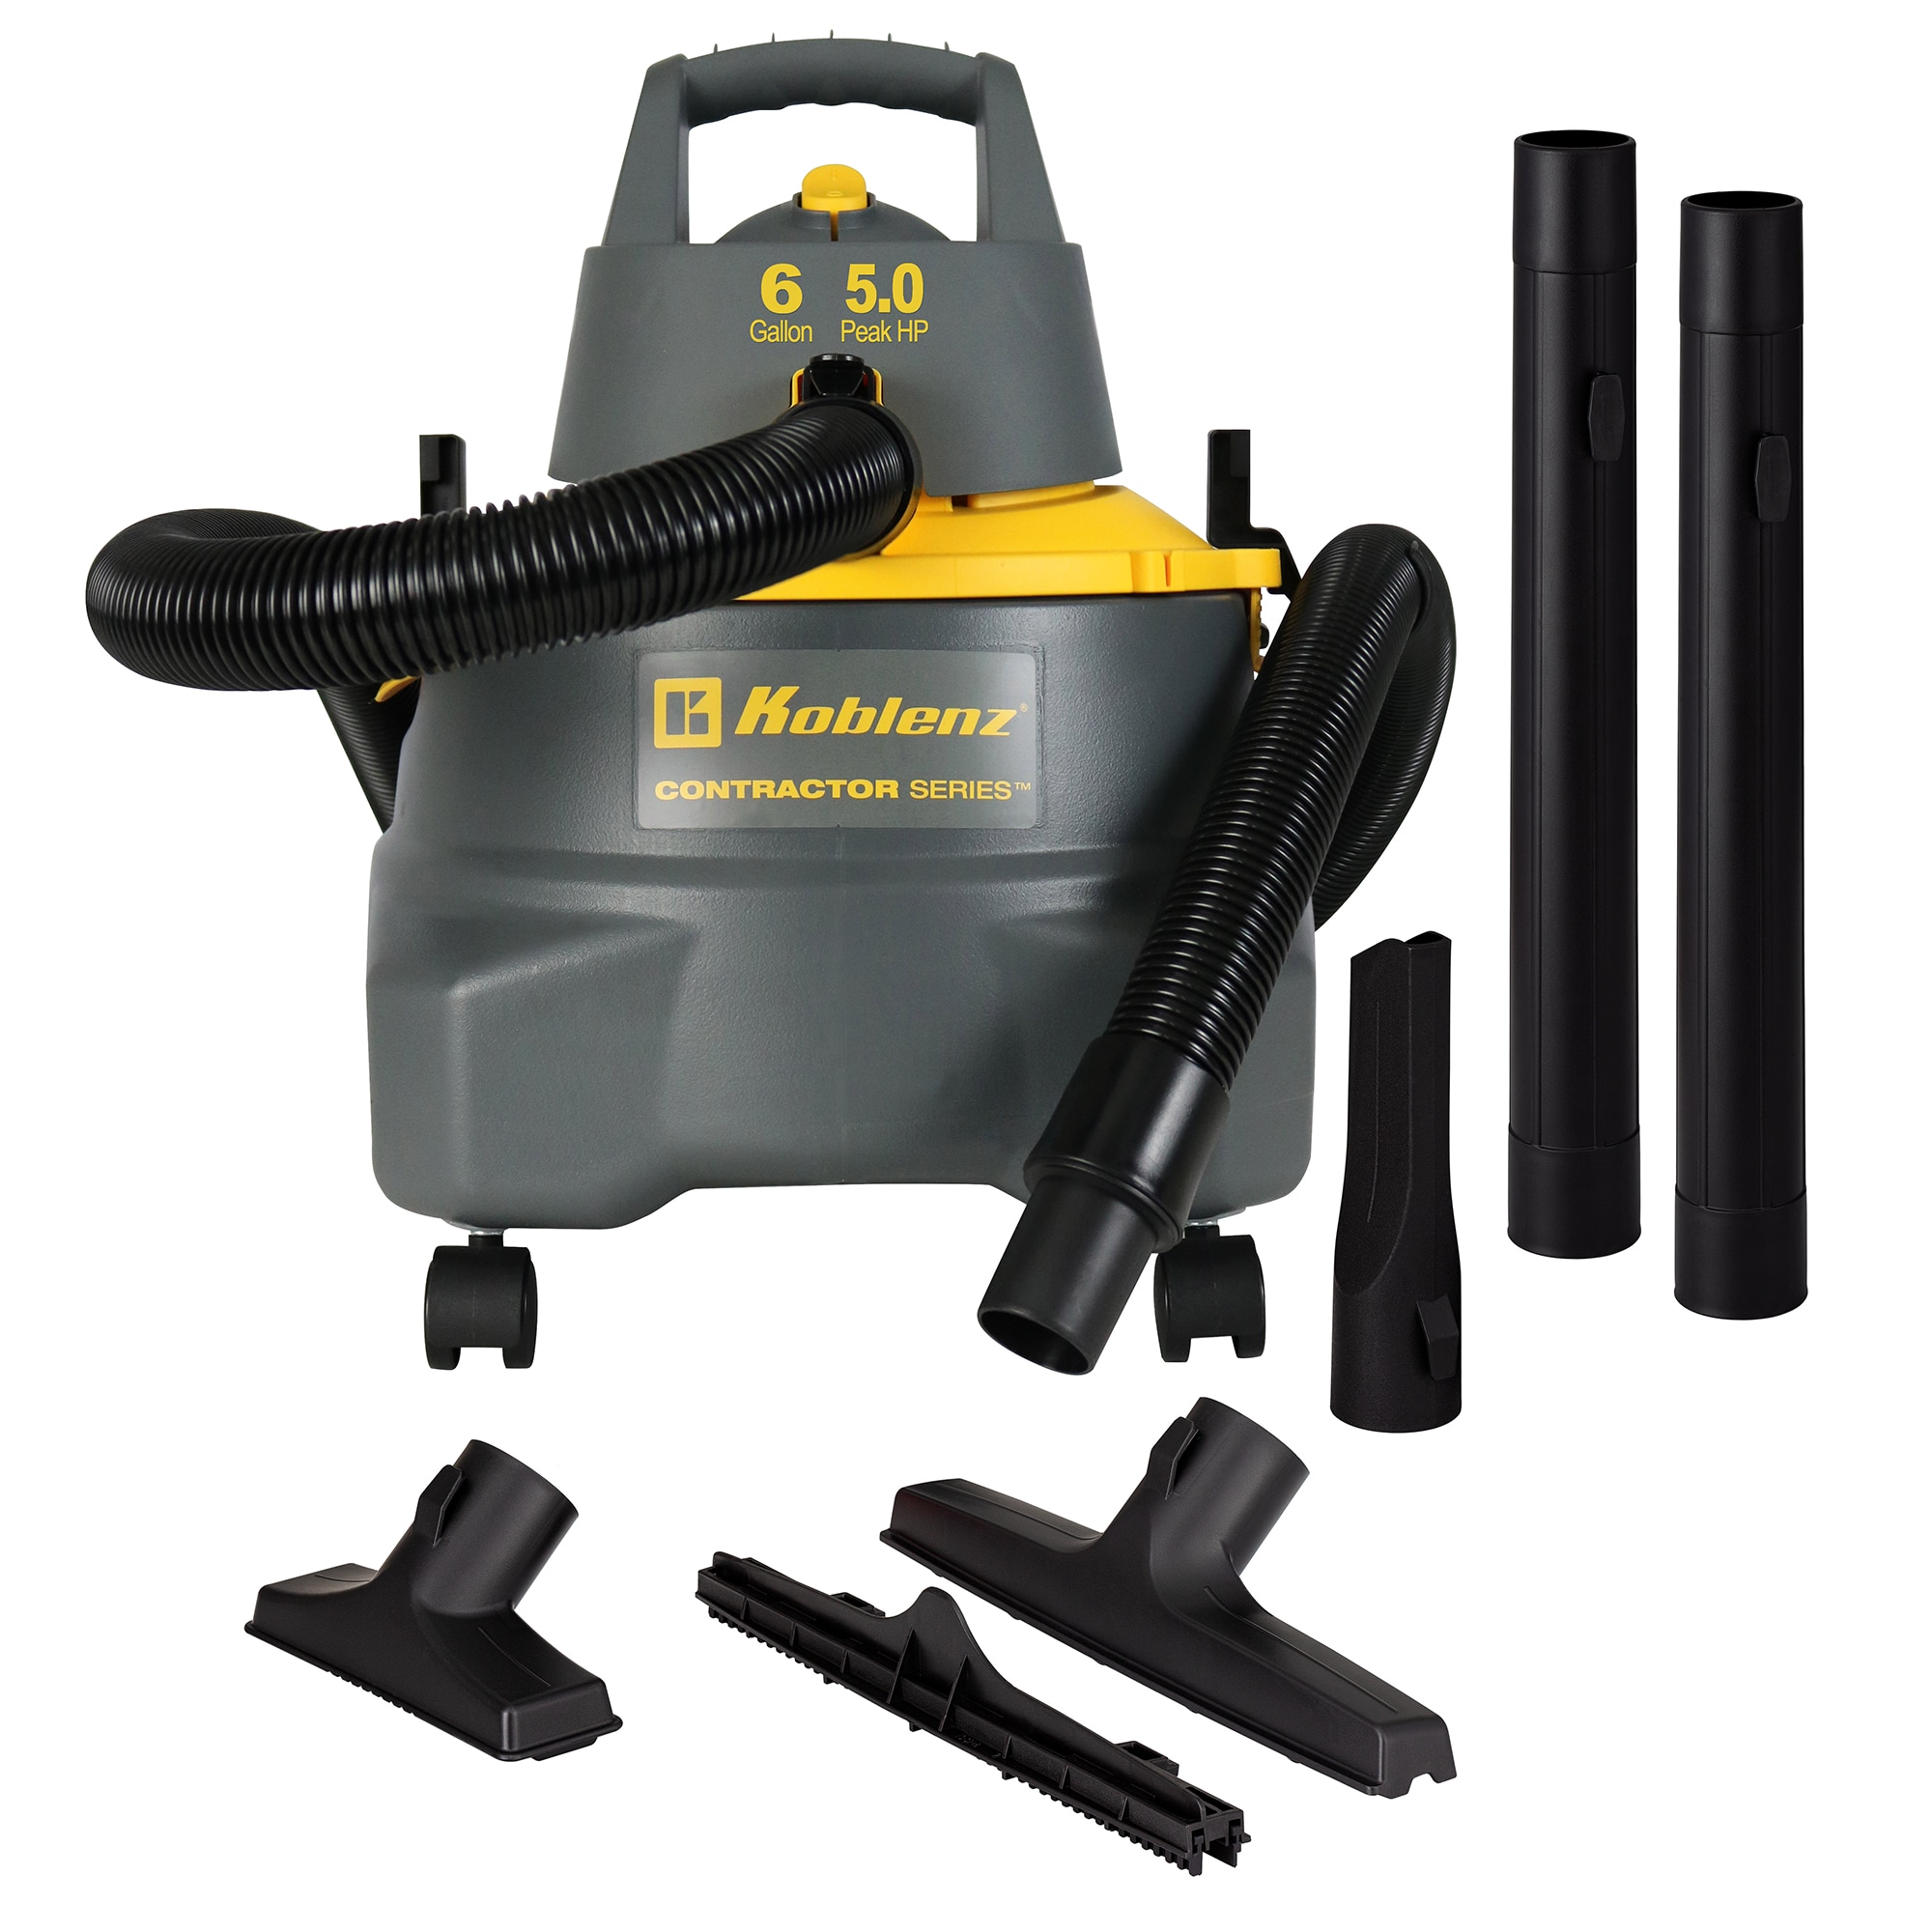 DeWalt 1.25 in. - 2.5 in. Car Cleaning Accessory Kit for Wet/Dry Shop Vacuums